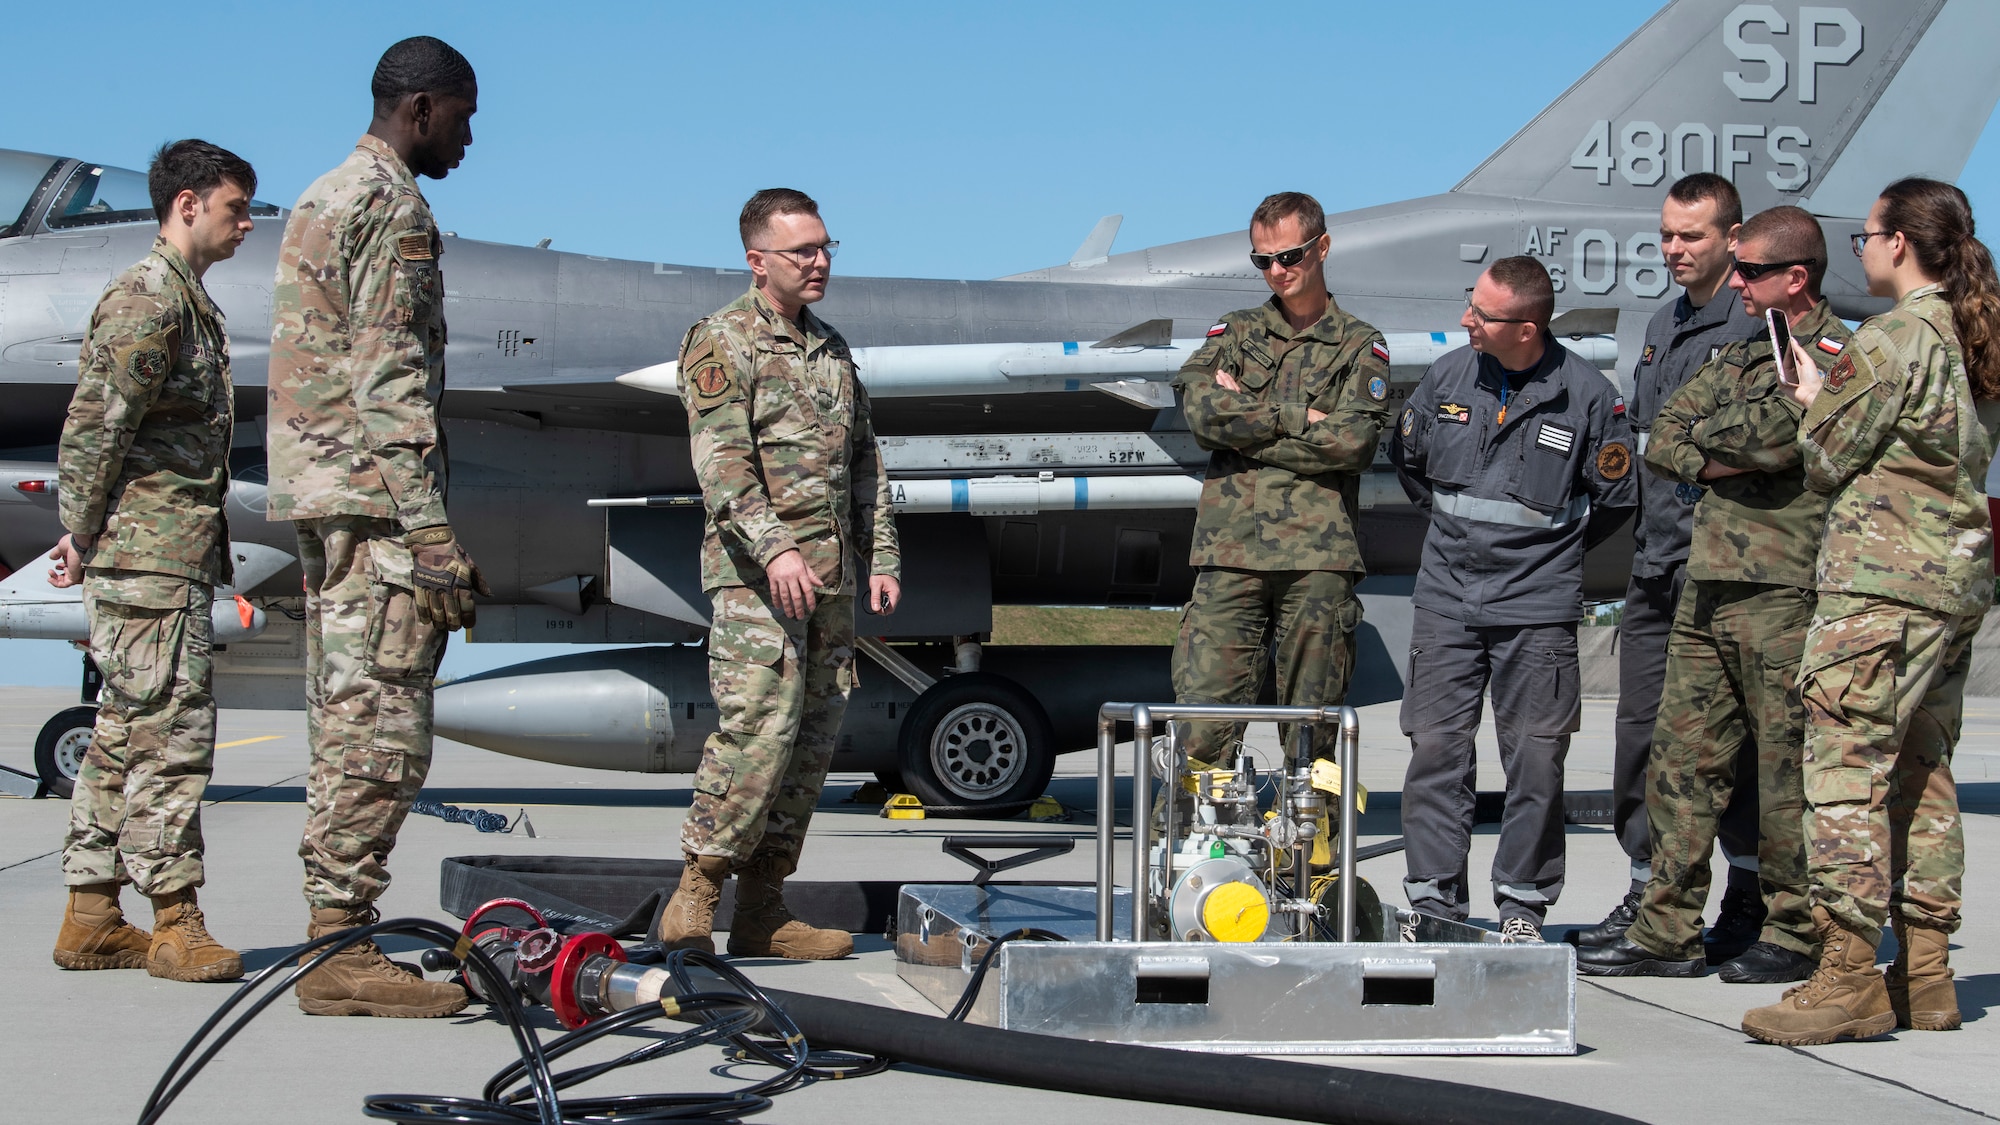 U.S. Air Force Master Sgt. Jason Yunker, 480th Expeditionary Fighter Squadron Fuels Management Flight operations superintendent (center), discusses the Versatile Integrating Partner Equipment Refueling (VIPER) kit, with members of the Polish air force at Łask Air Base, Poland, Aug. 9, 2021. The kit utilizes host nation refueling equipment to support fifth-generation fighters, as well as any U.S. Air Force aircraft anywhere in the world. (U.S. Air Force photo by Tech. Sgt. Anthony Plyler)